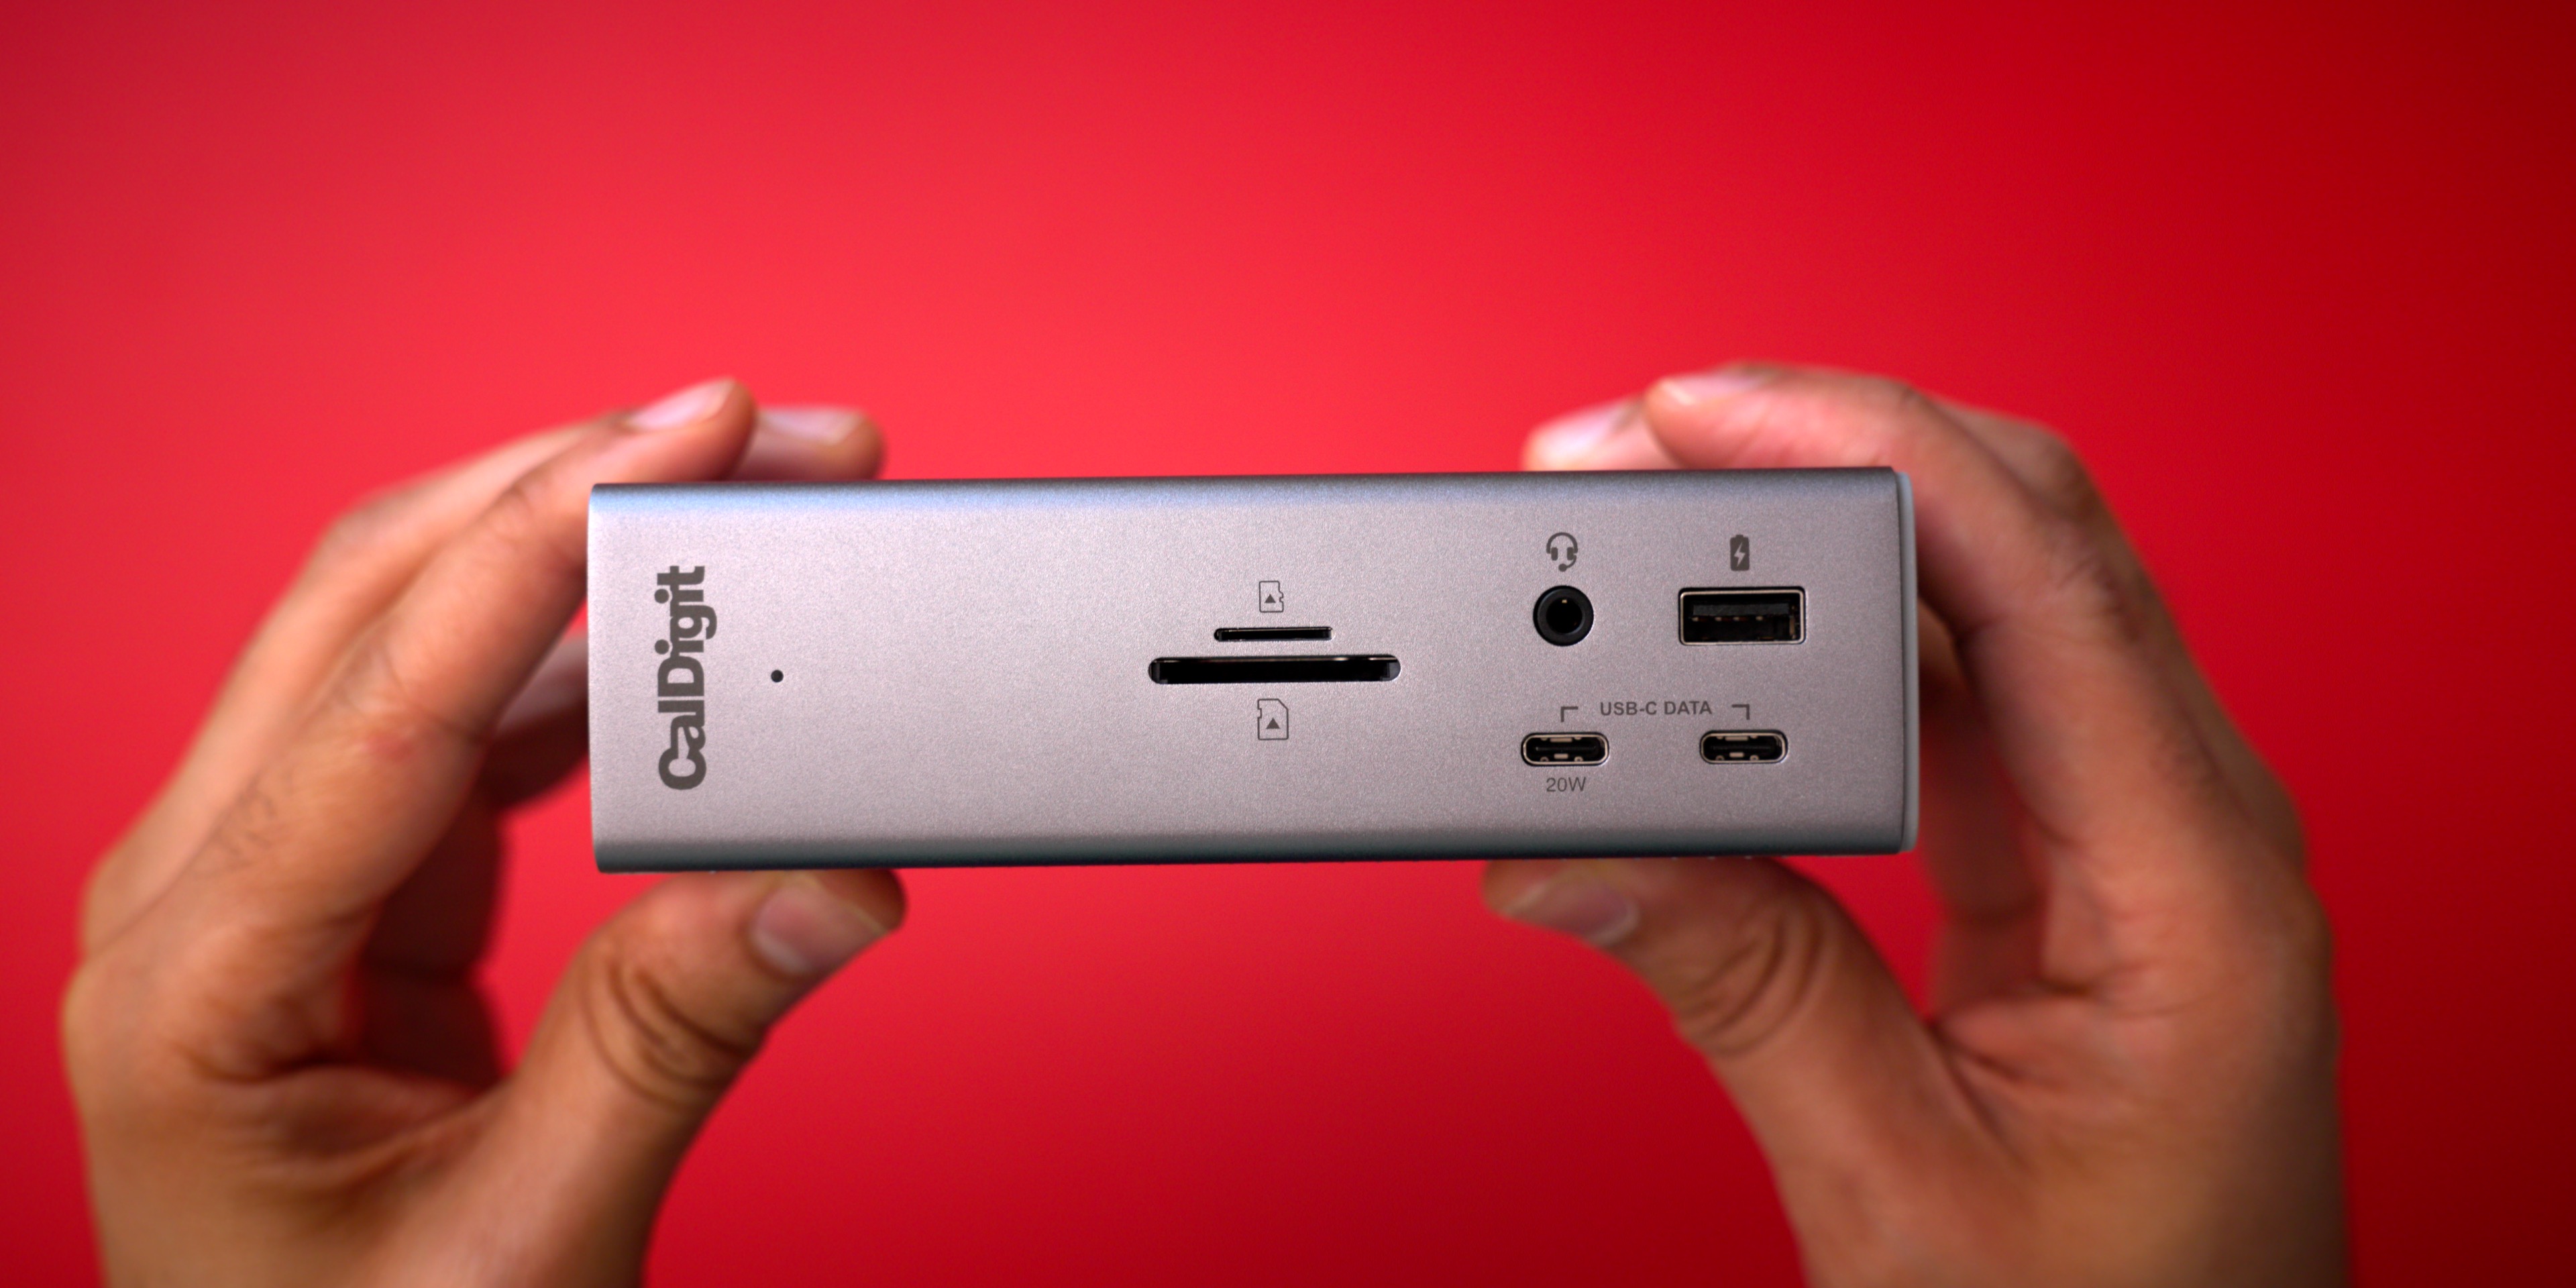 CalDigit TS4 review: Thunderbolt 4 docks don't get much better than this